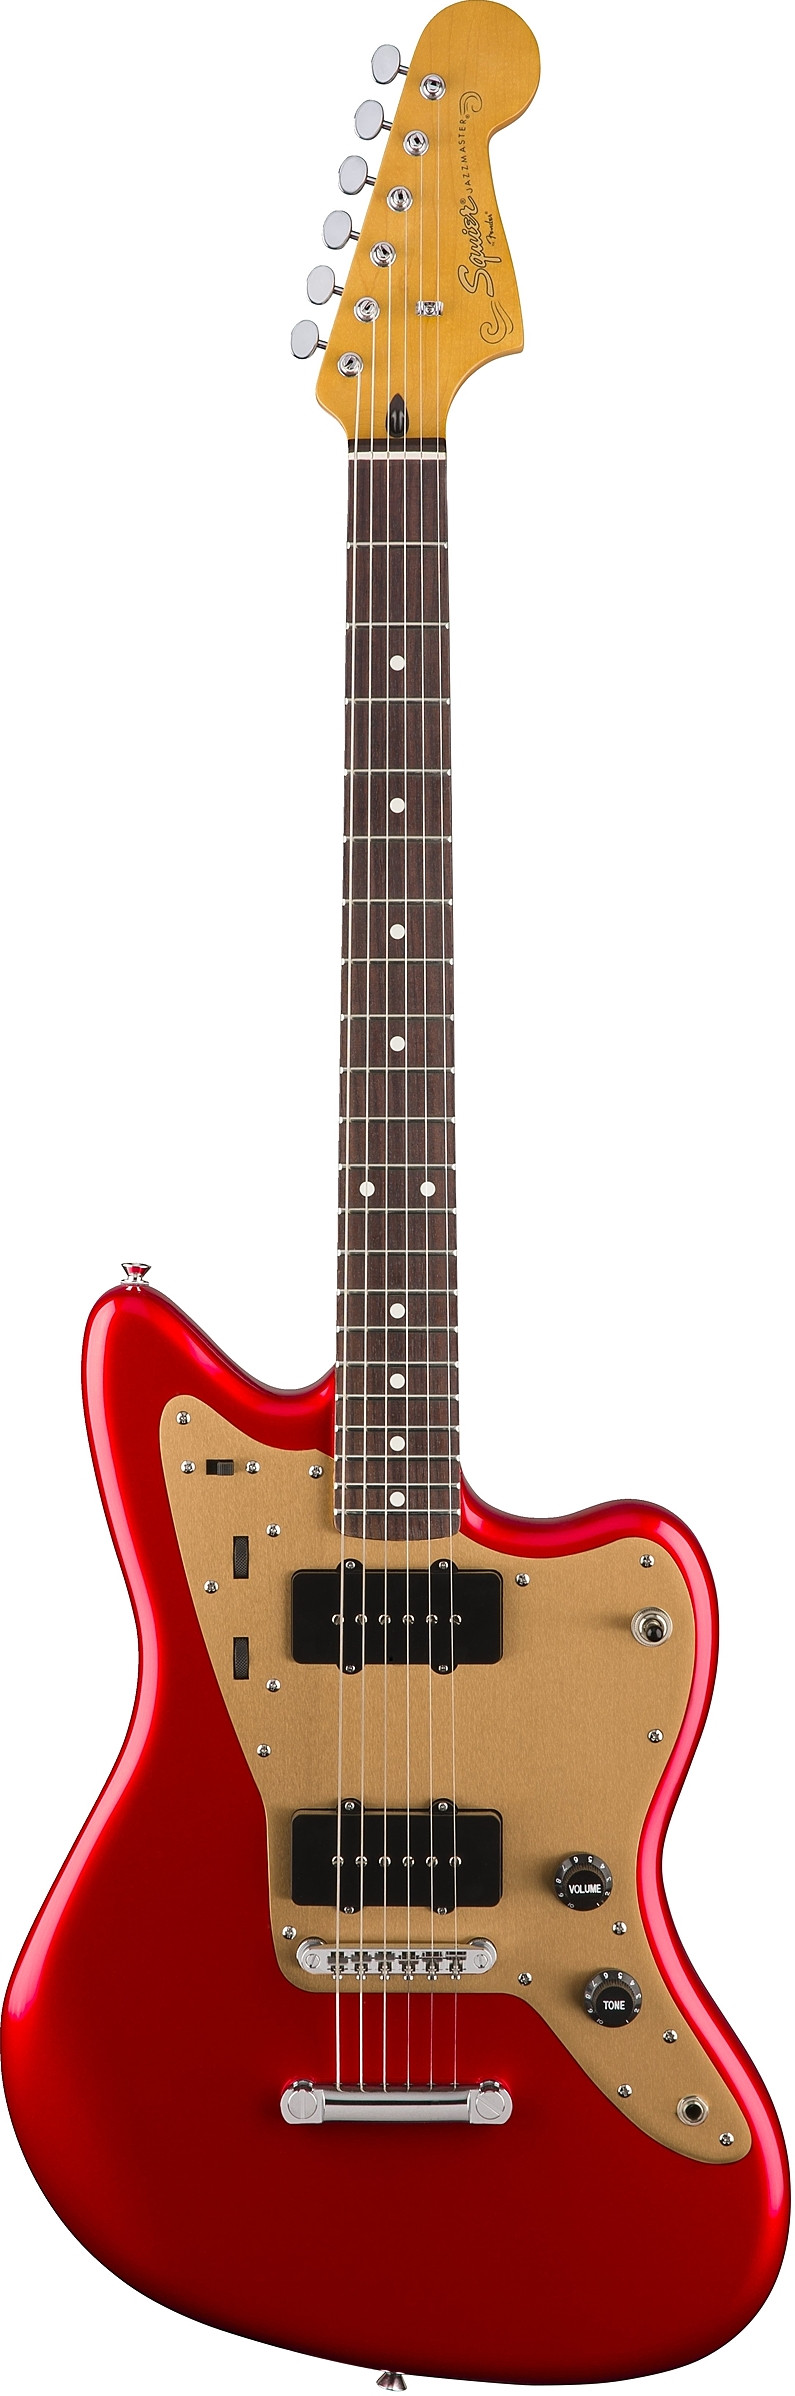 Deluxe Jazzmaster ST by Squier by Fender